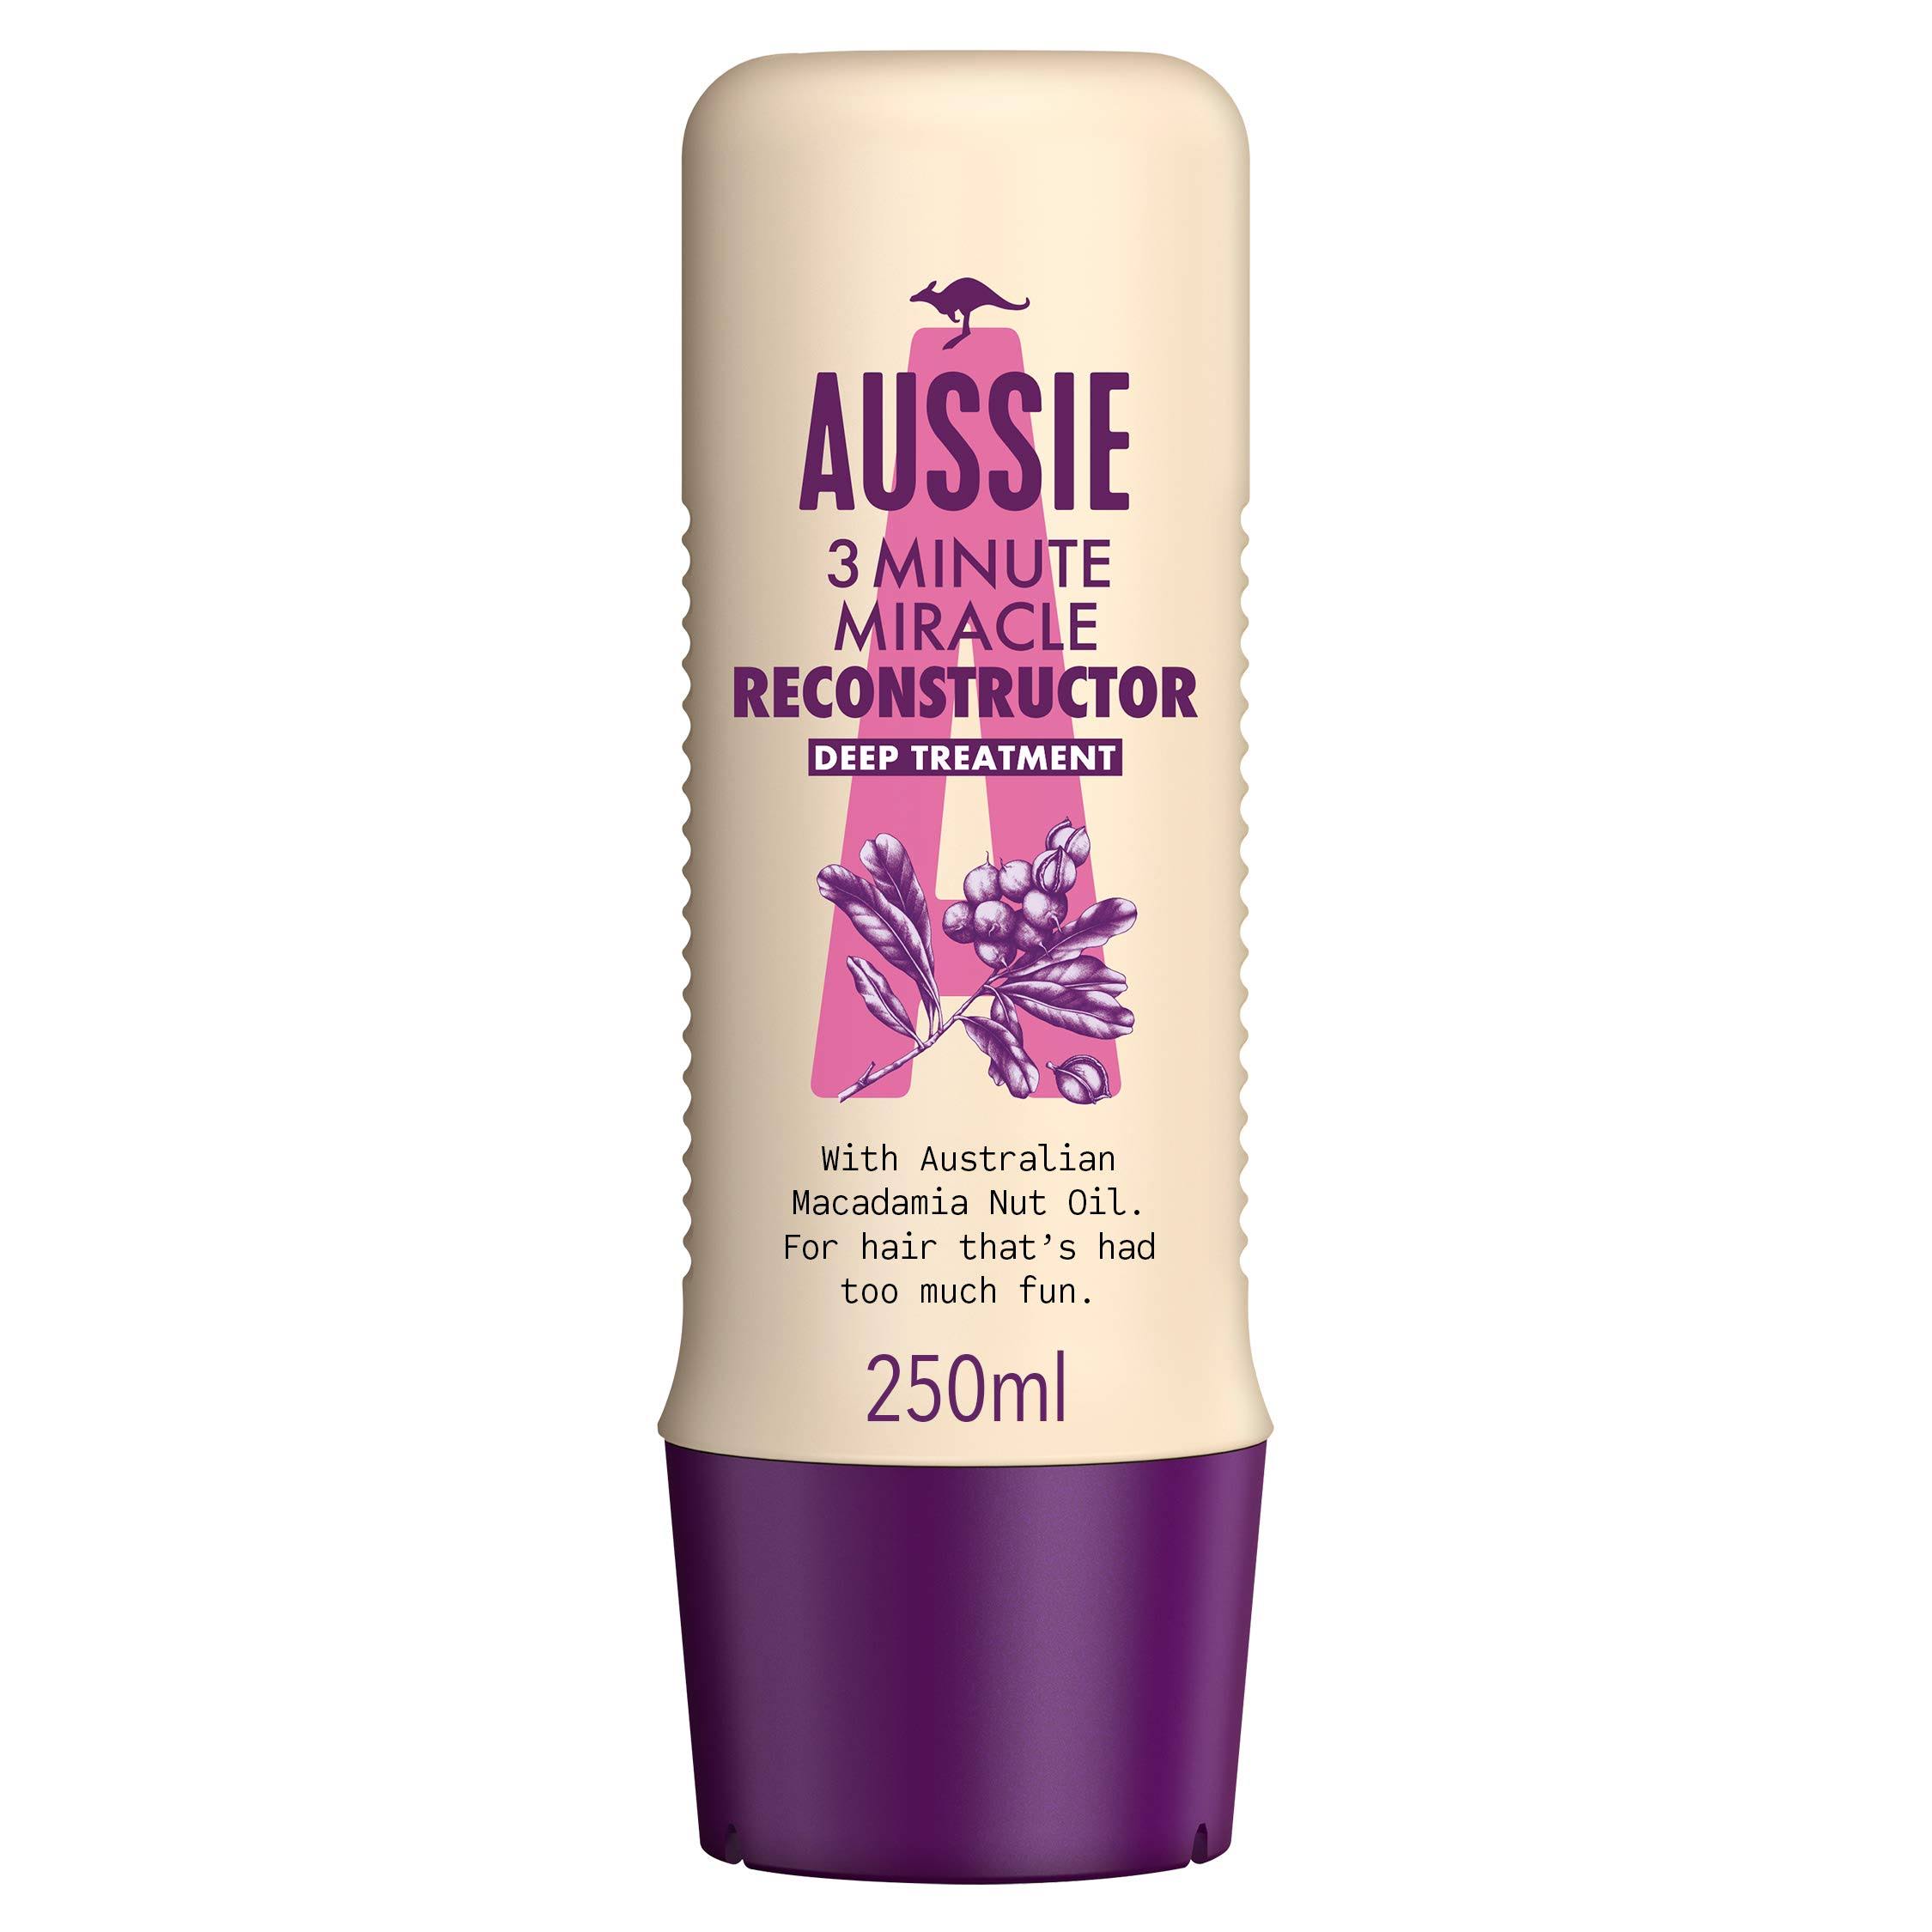 Aussie 3 Minute Miracle Reconstructor Hair Treatment - 250ml